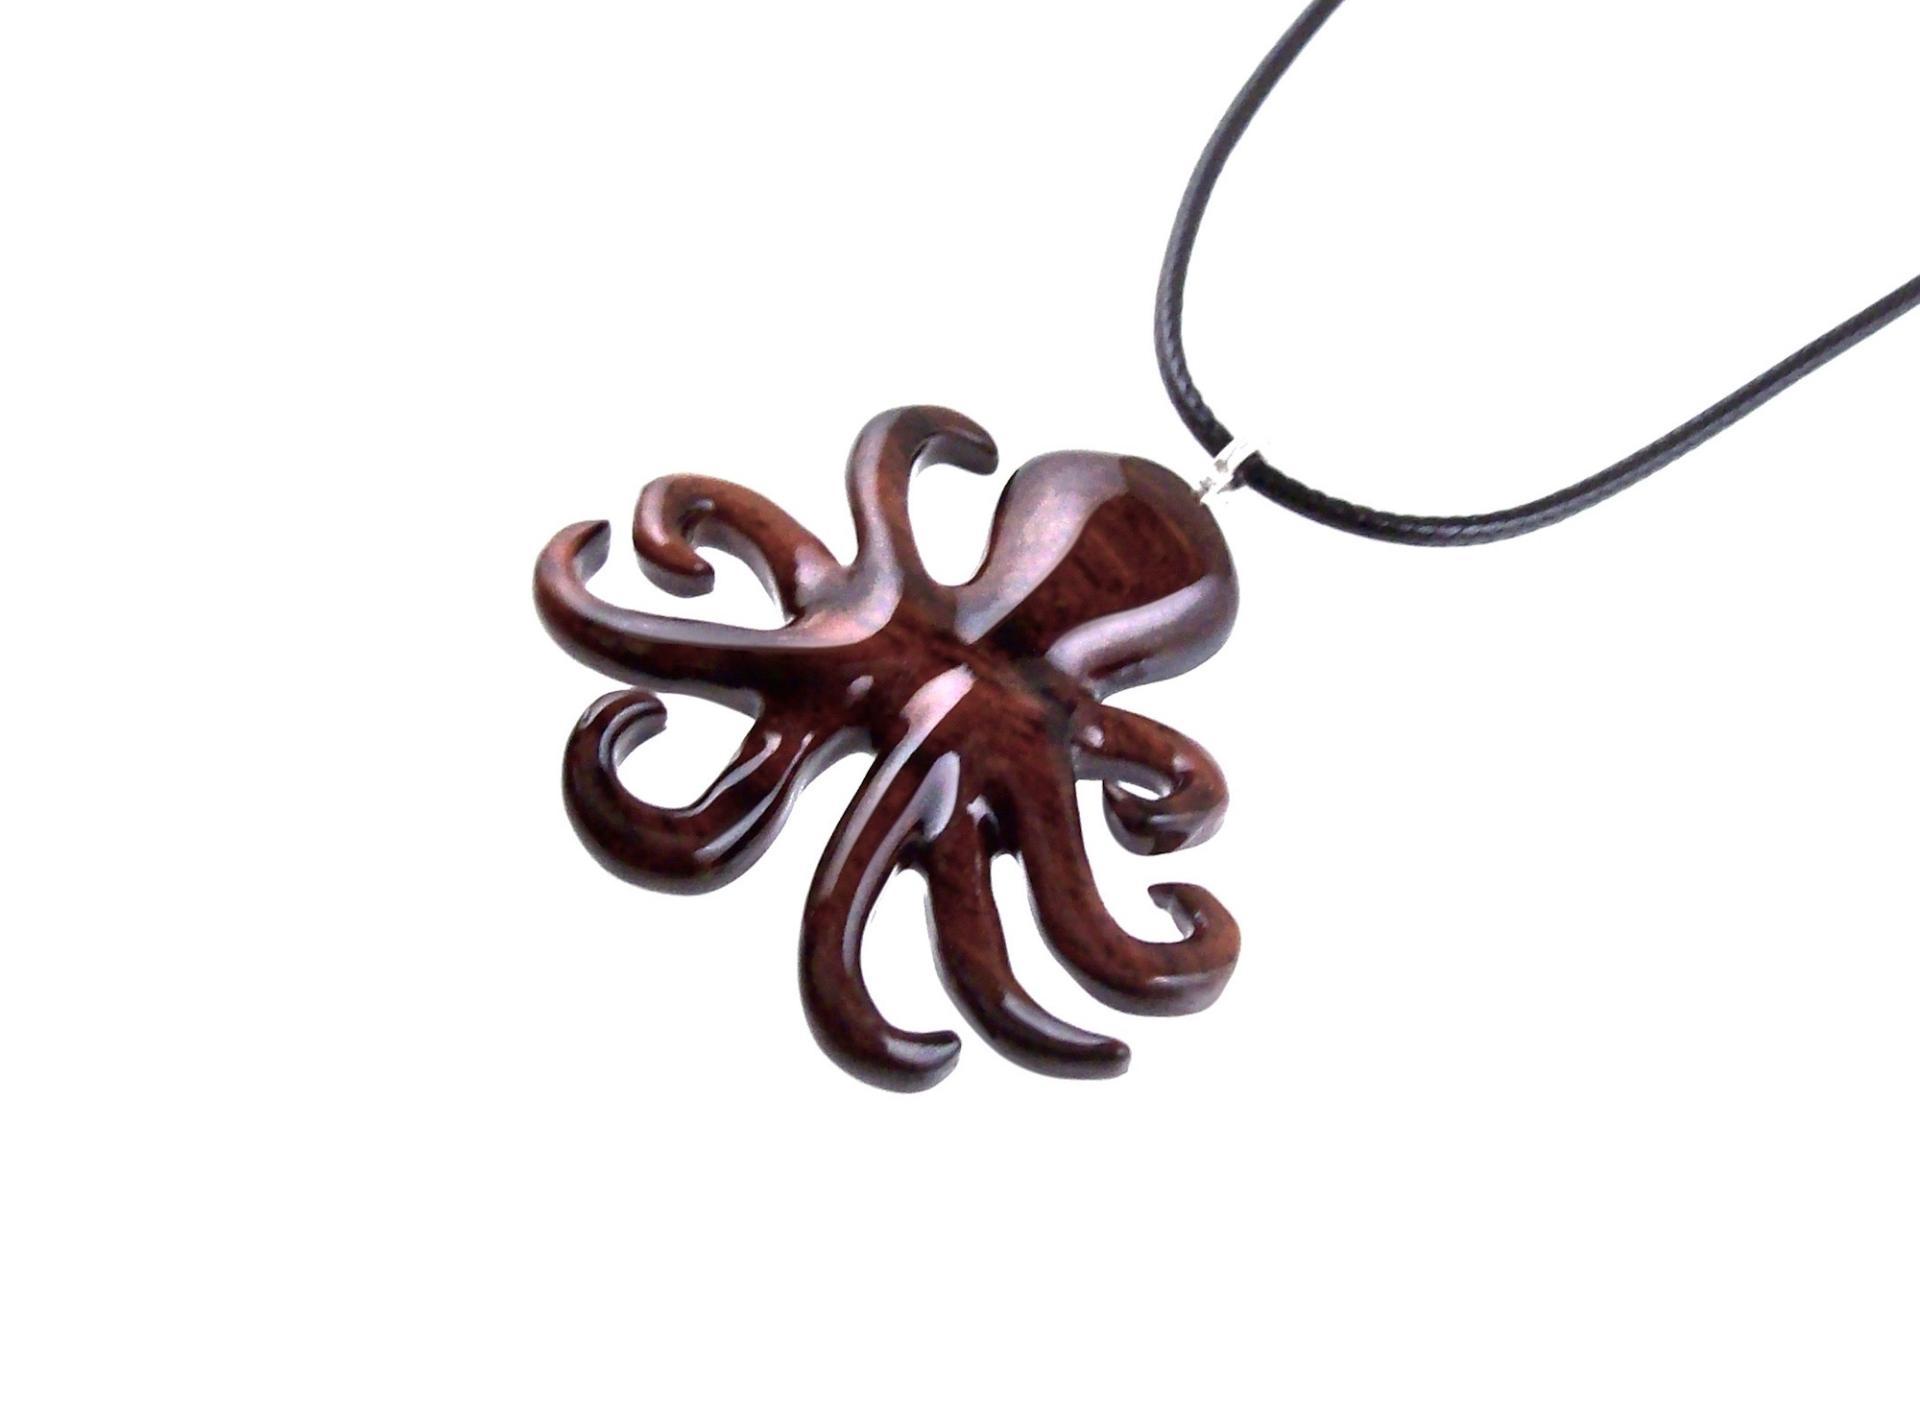 Octopus Necklace, Hand Carved Wooden Octopus Pendant, Squid Necklace, Kraken Pendant, Nautical Wood Jewelry Gift for Him Her